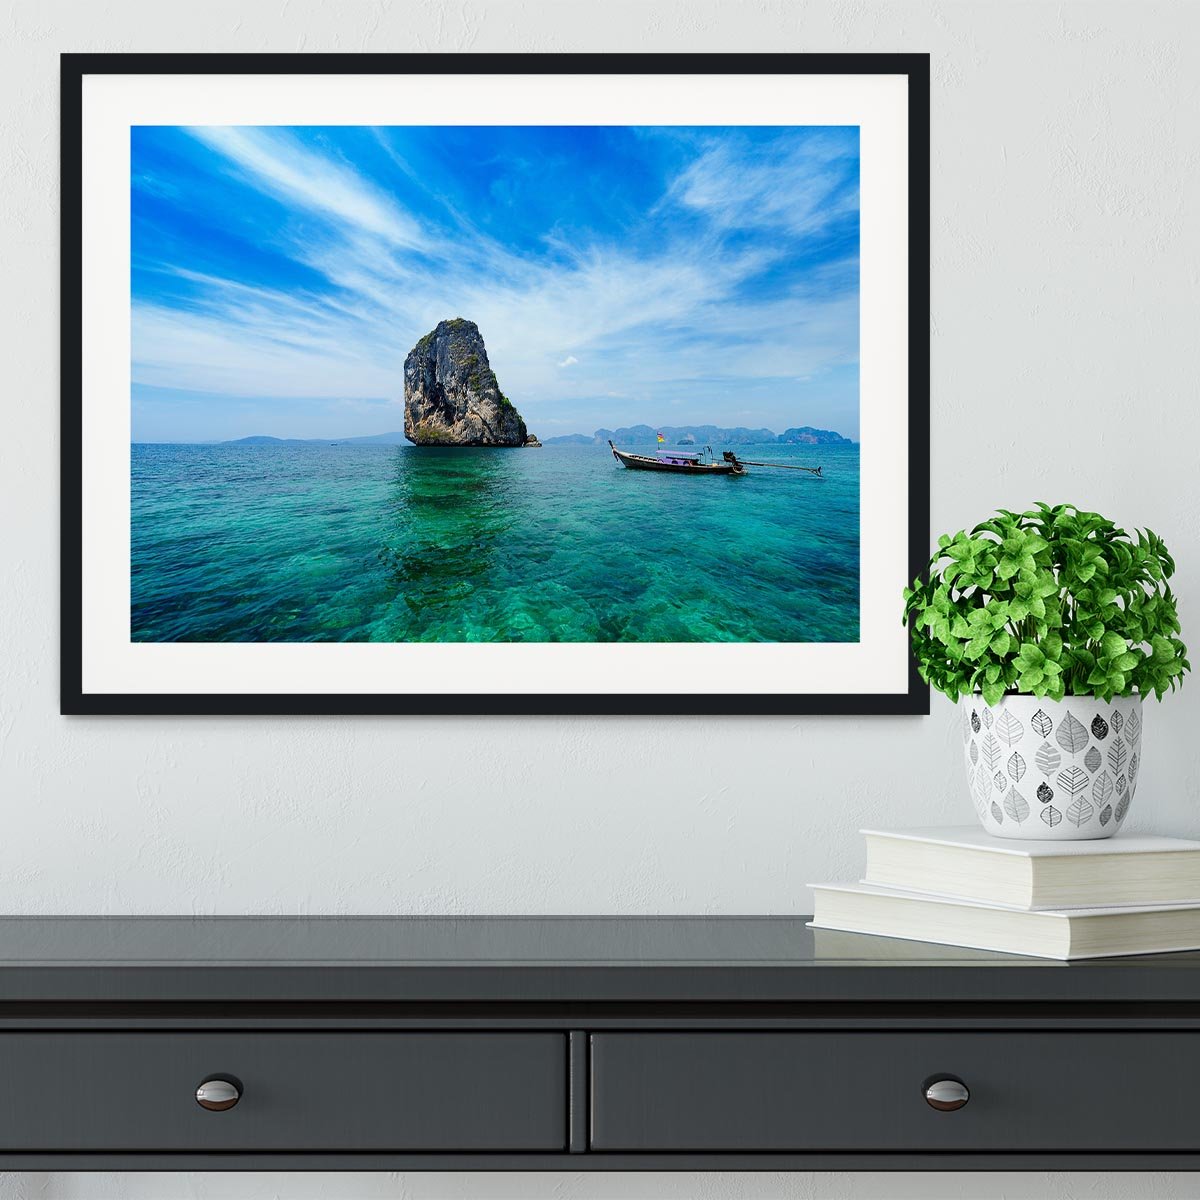 Traditional Thai boat in the blue sea Framed Print - Canvas Art Rocks - 1